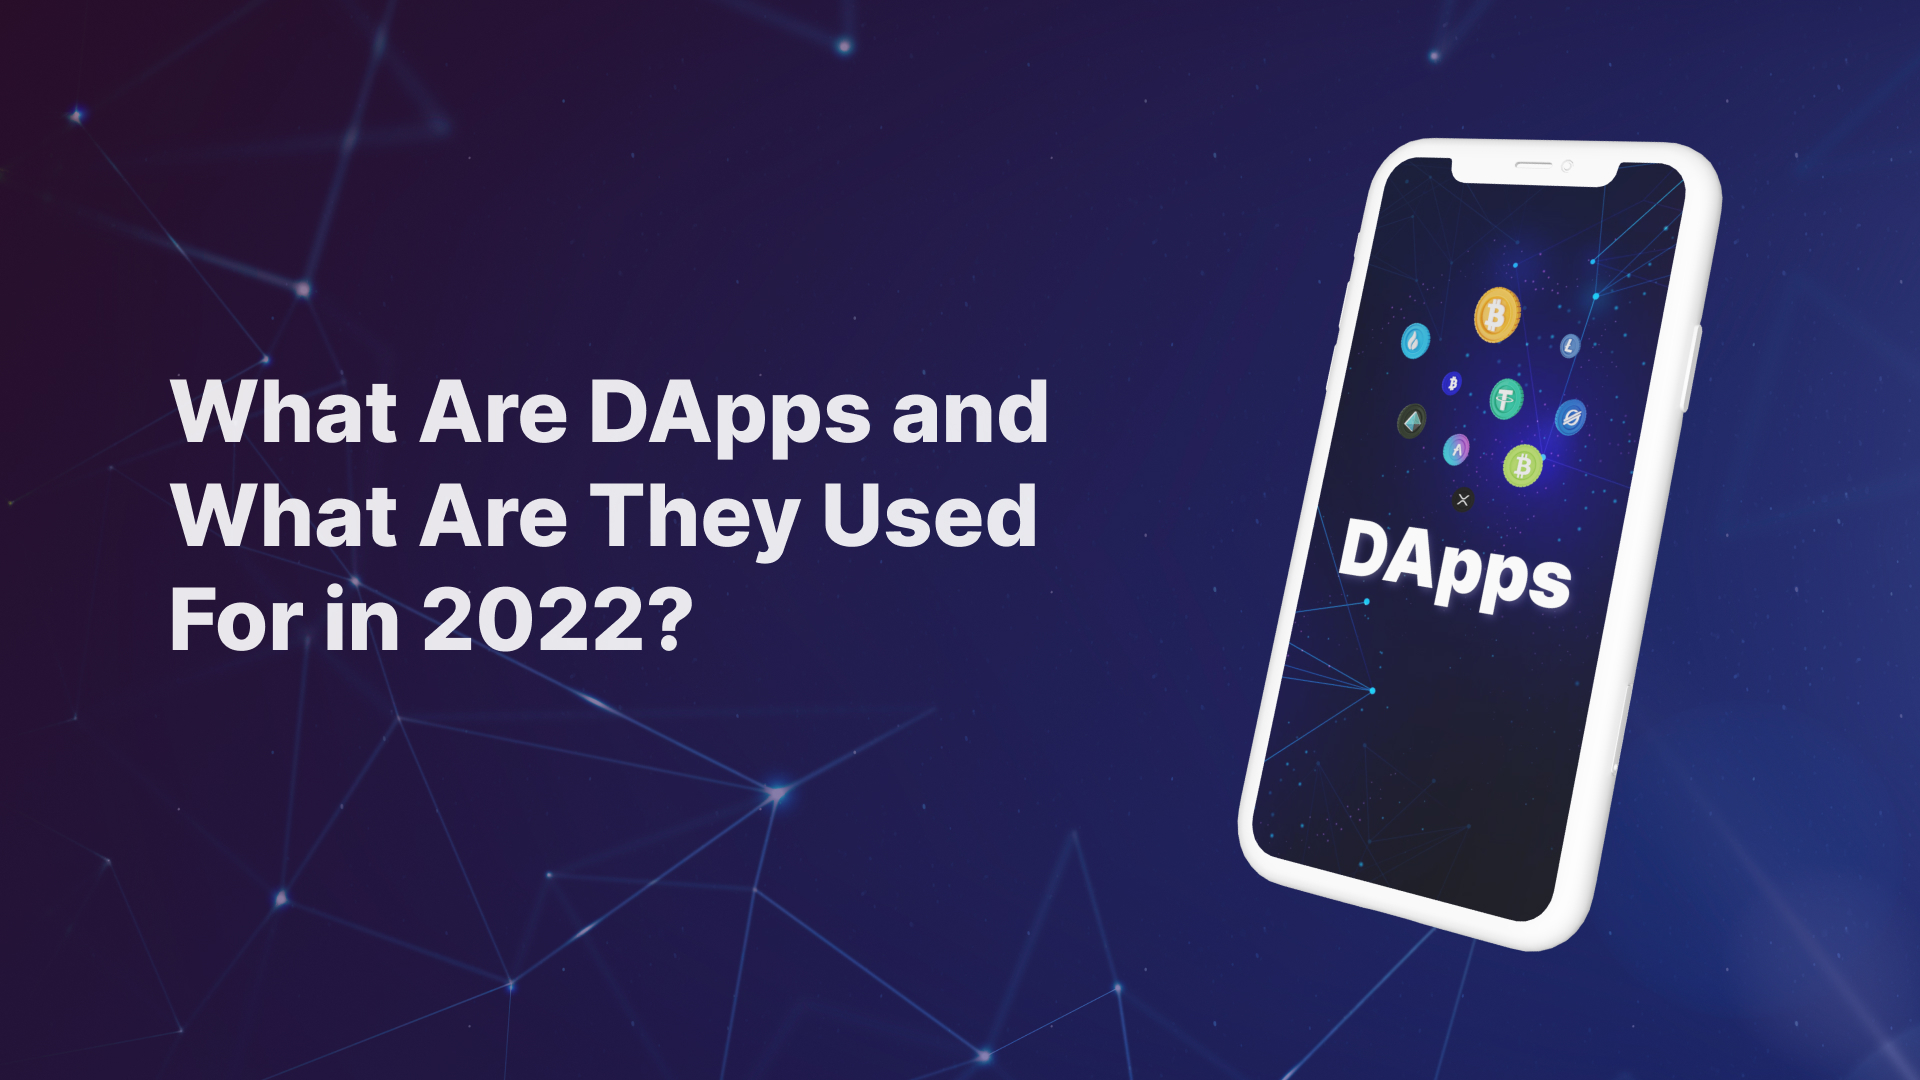 What Are DApps and What Are They Used For in 2022?